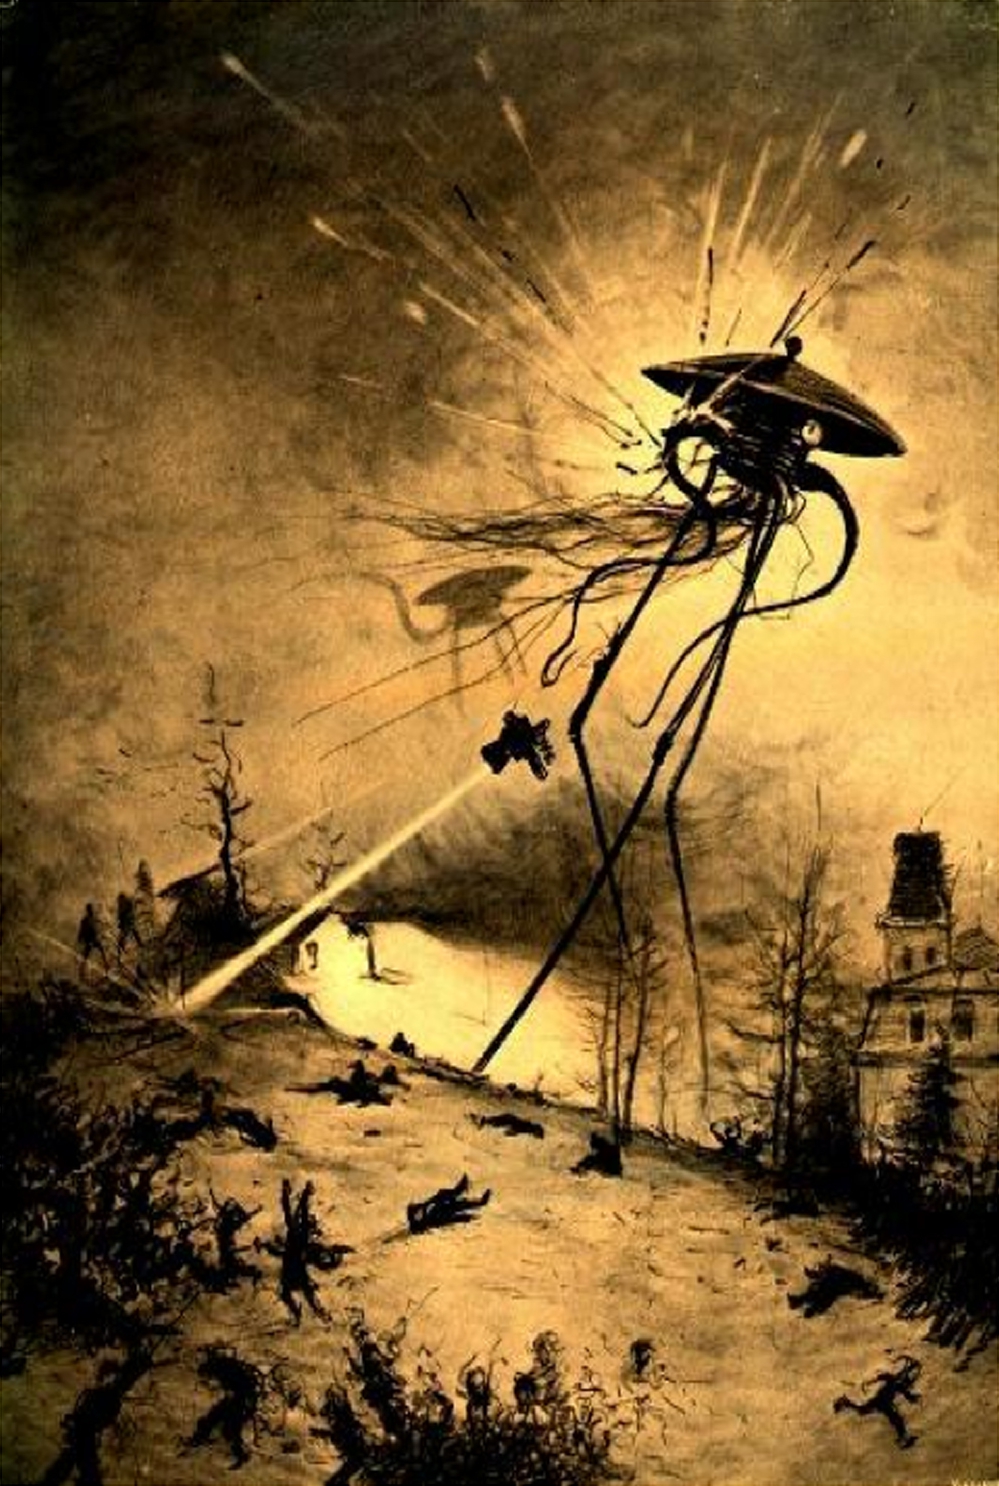 Illustration by Alvim Corréa, from the 1906 French edition of H.G. Wells' "War of the Worlds".
